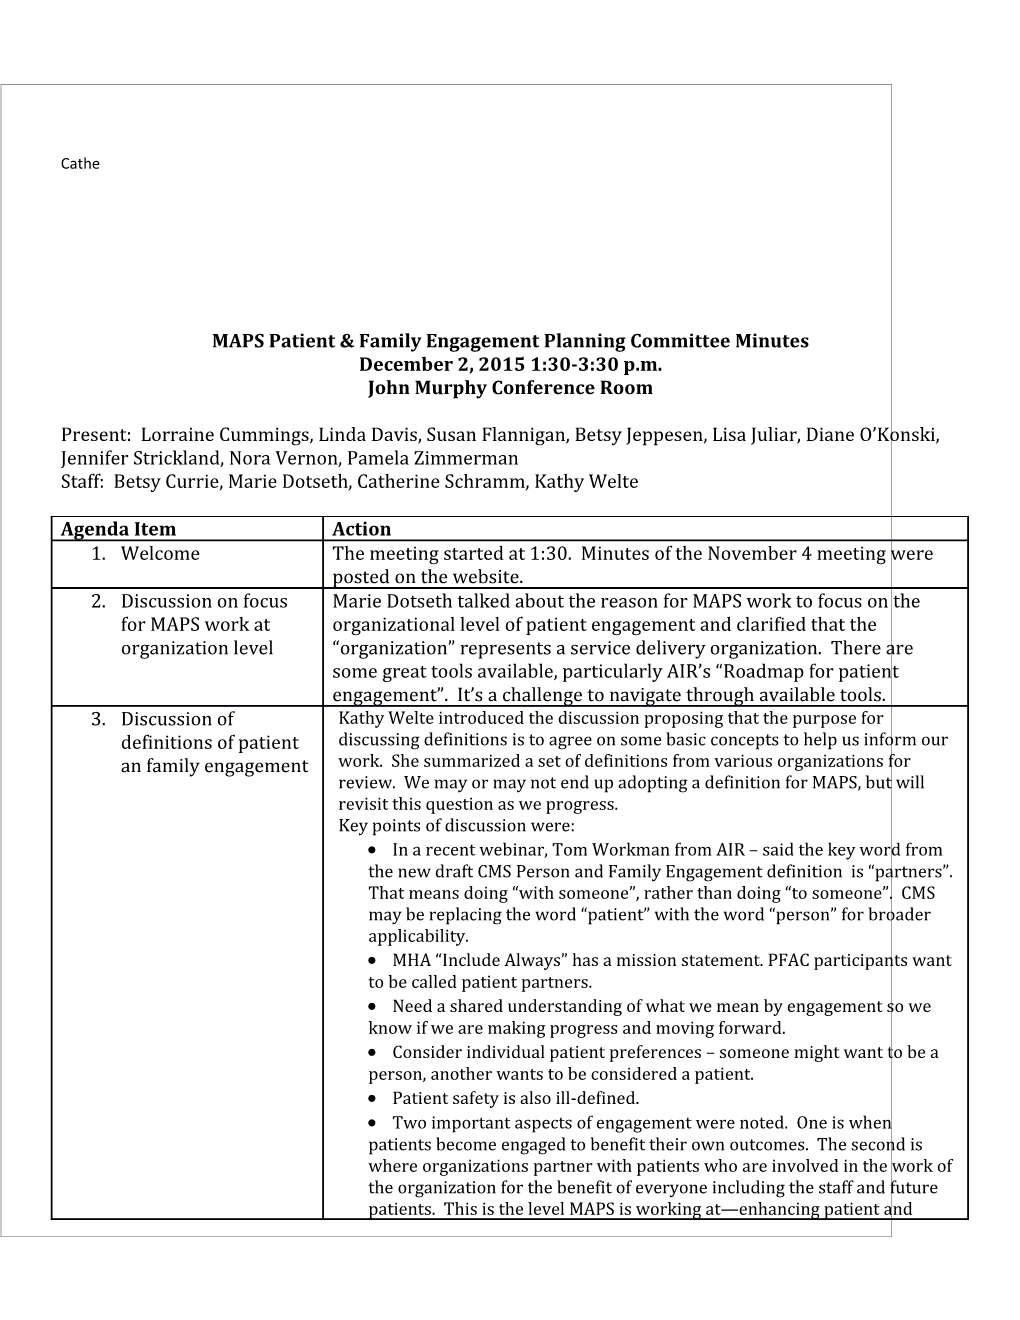 MAPS Patient & Family Engagement Planning Committee Minutes